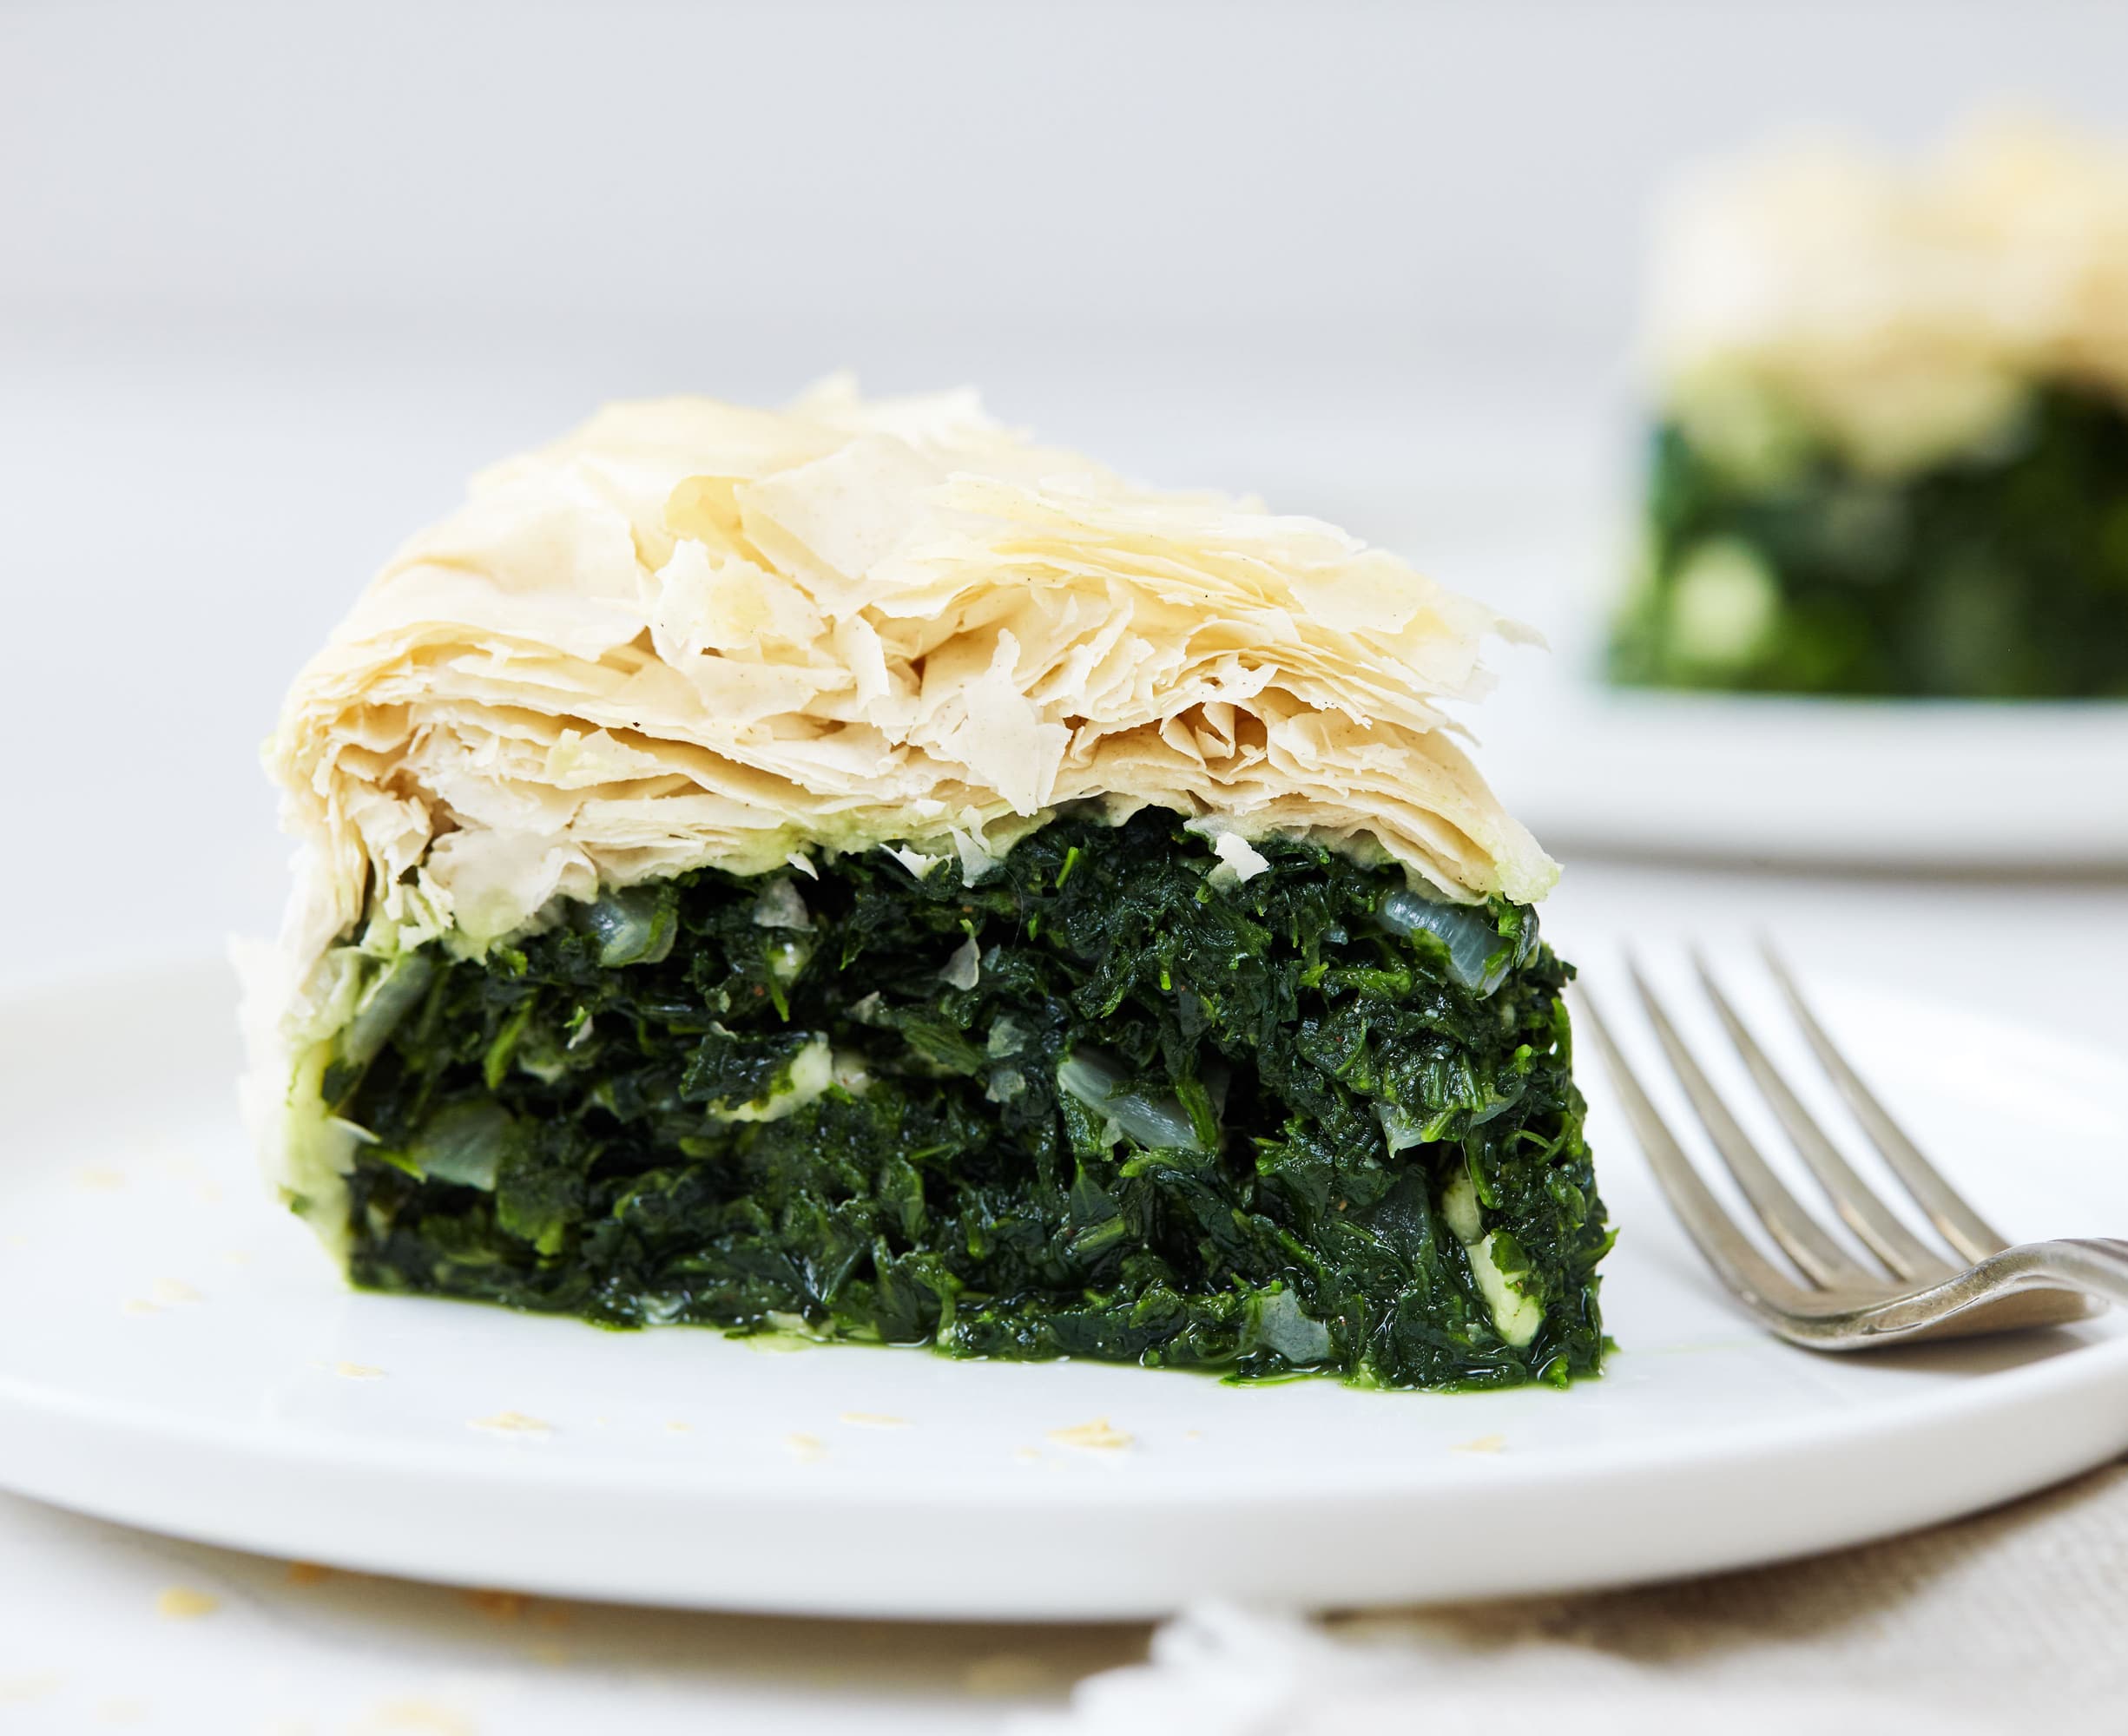 Our Spanikopita, or Greek Spinach pie, is a rich pastry stuffed with spinach and cheese. featuring healthier phyllo dough, onion, and crumbled feta.